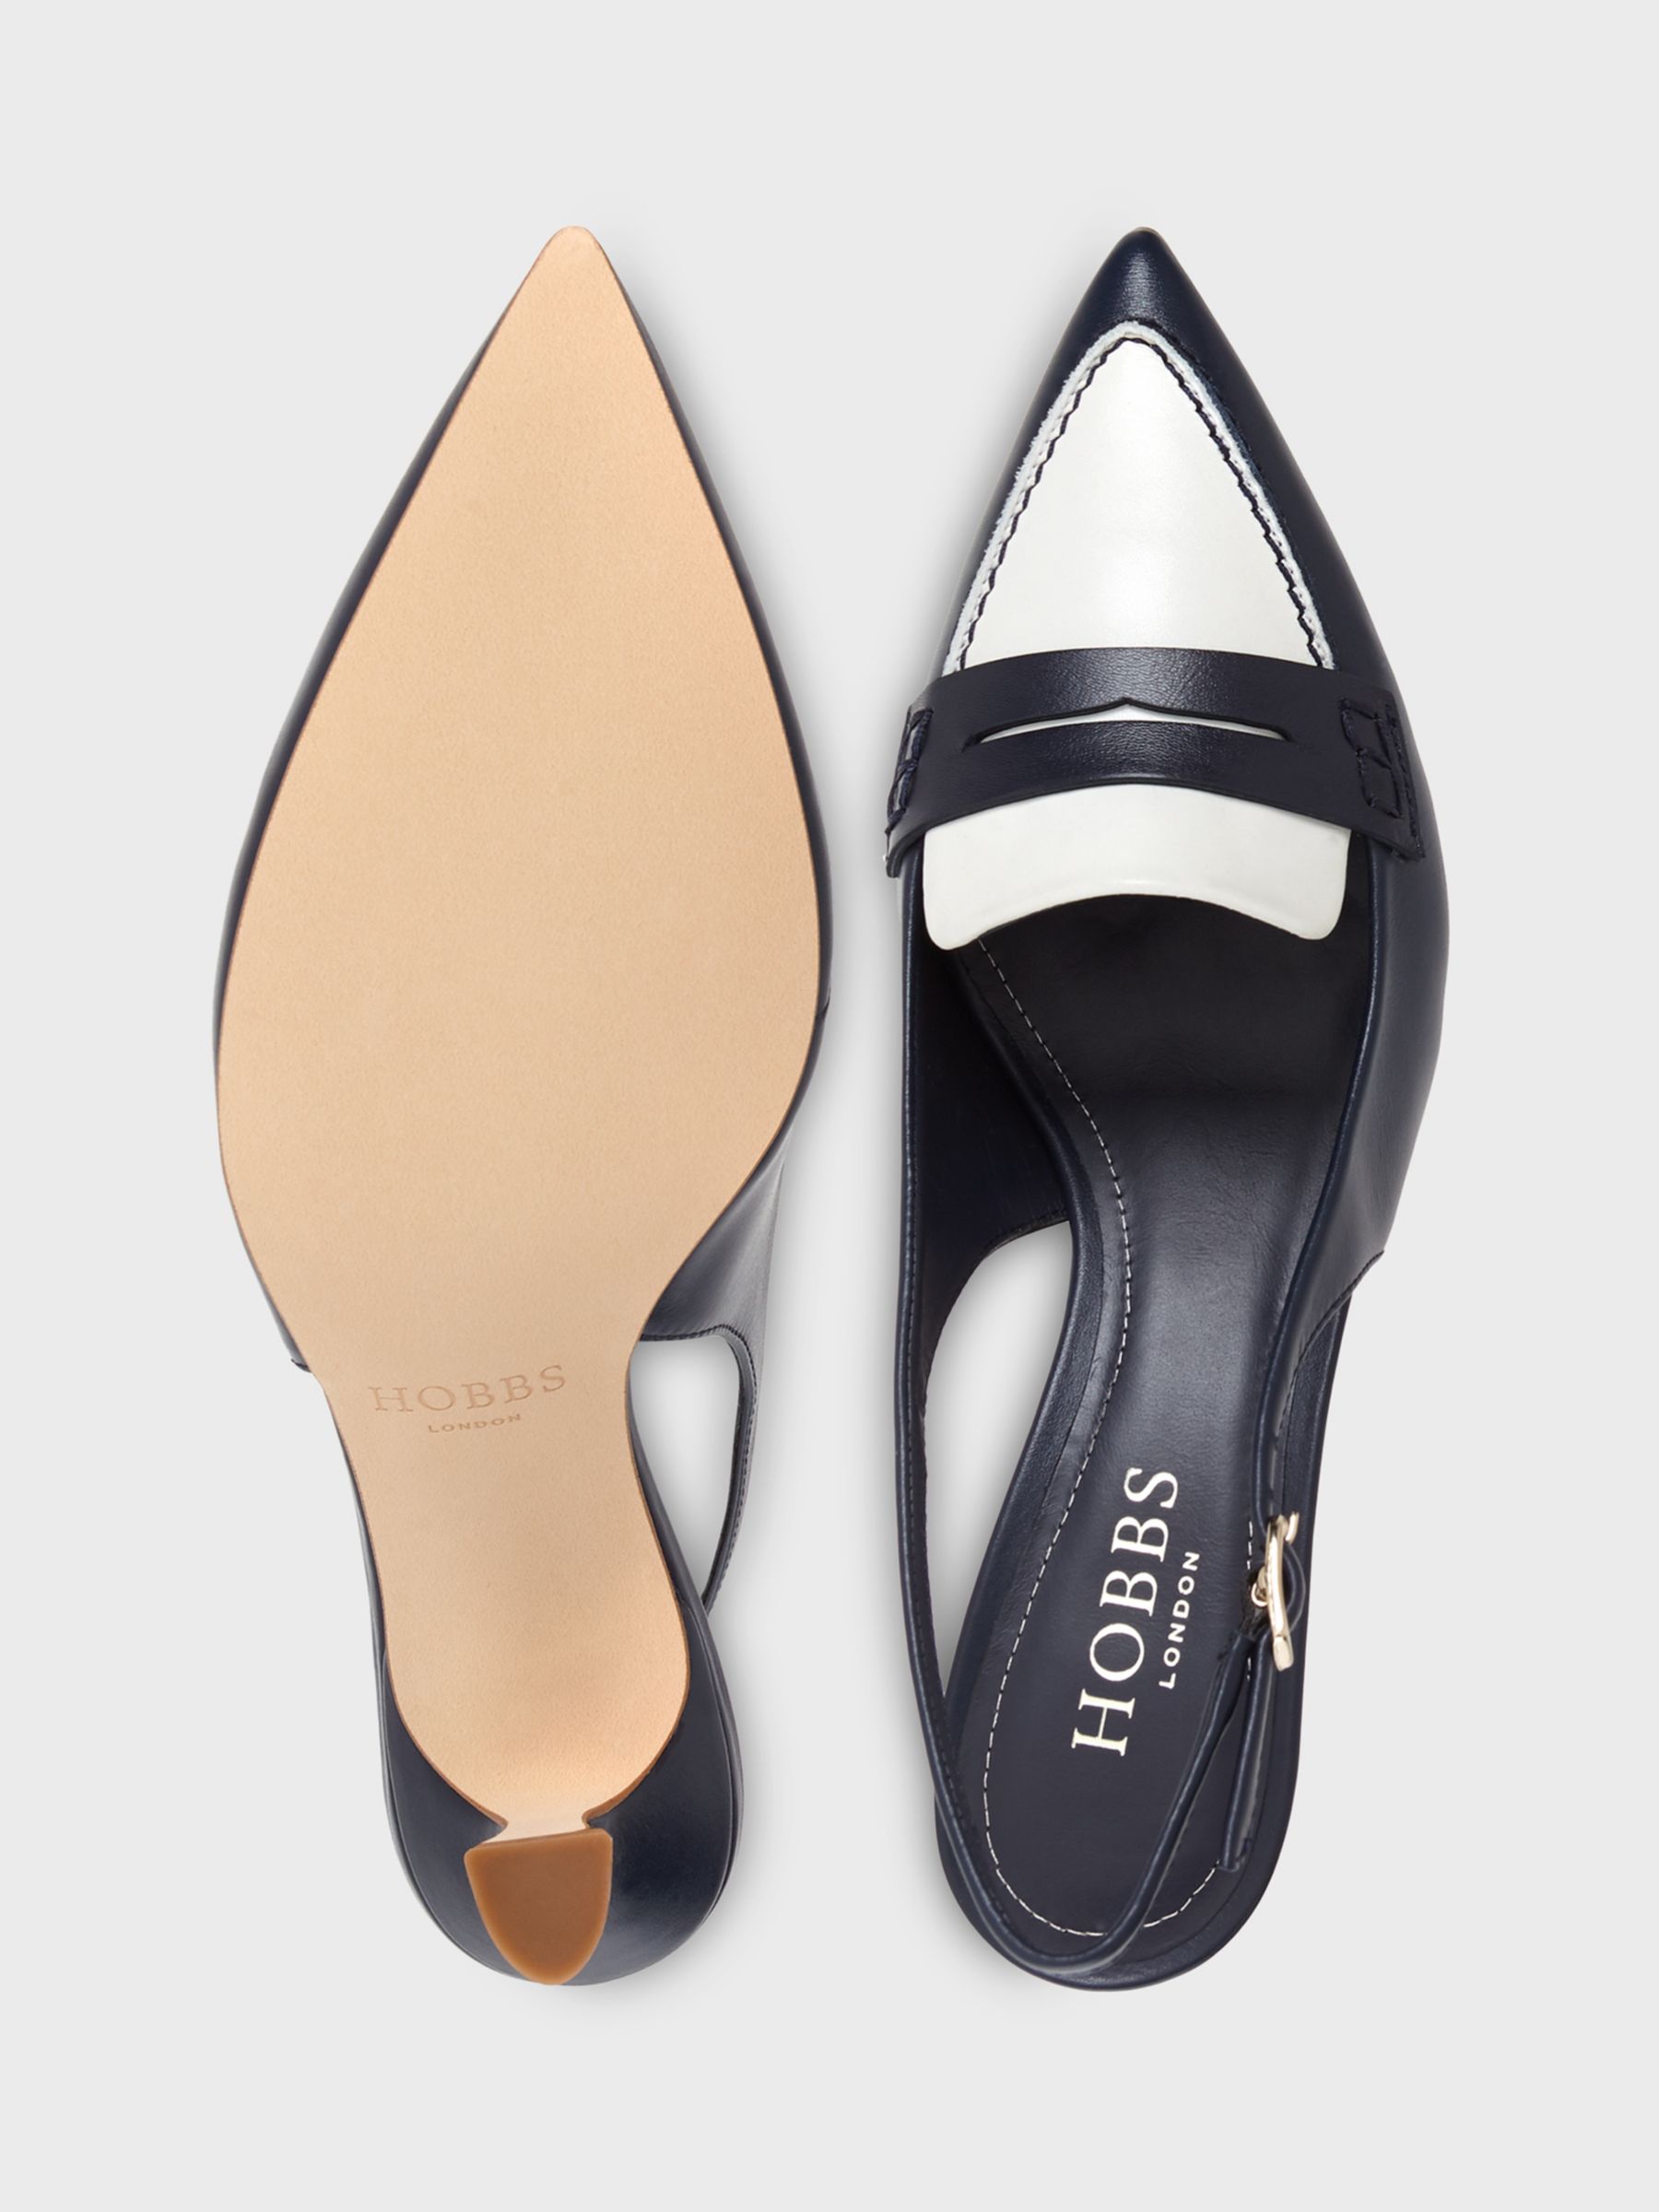 Hobbs Mischa Leather Slingback Court Shoes, Navy/Ivory at John Lewis ...